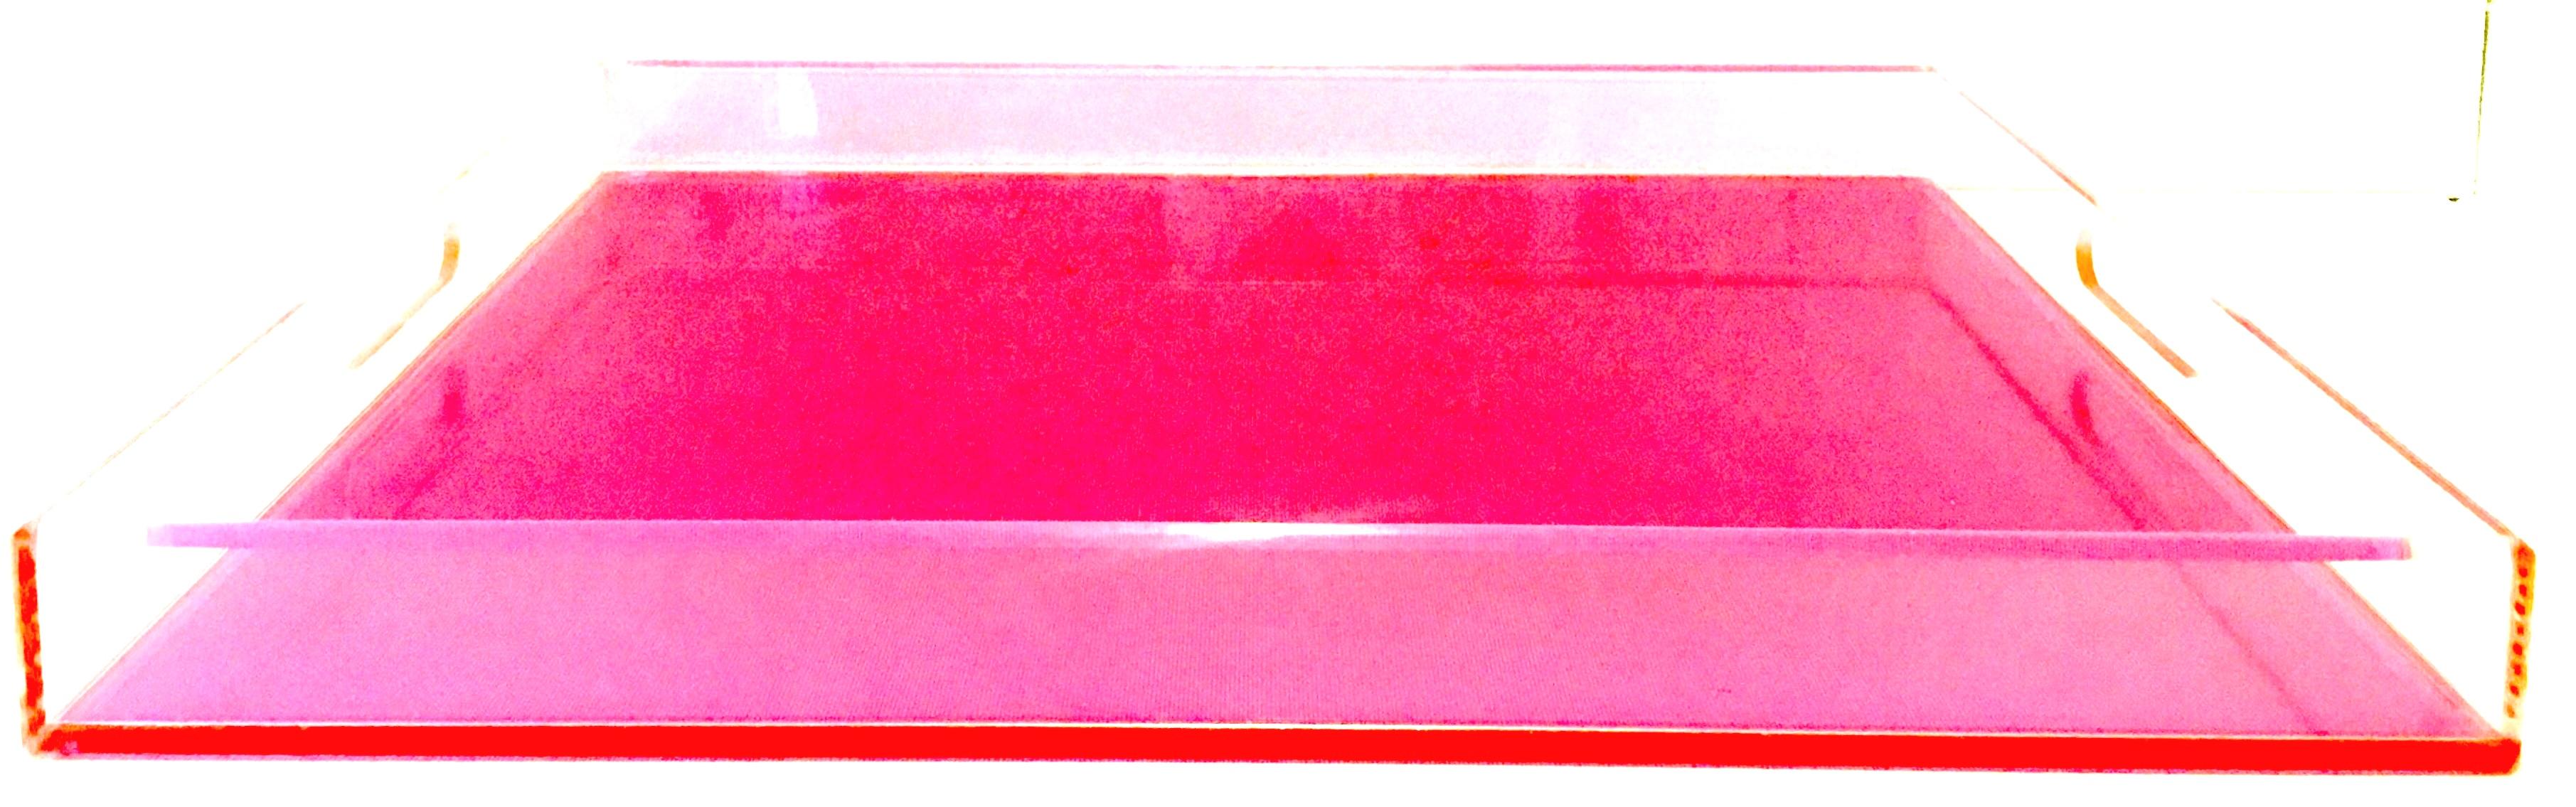 21st century Modern custom made in the style of Alexandra Von Furstenberg, neon pink and clear large, cut-out handle Lucite tray. This well constructed Lucite tray has been fabricated to the highest standards with beveled edges and is .25